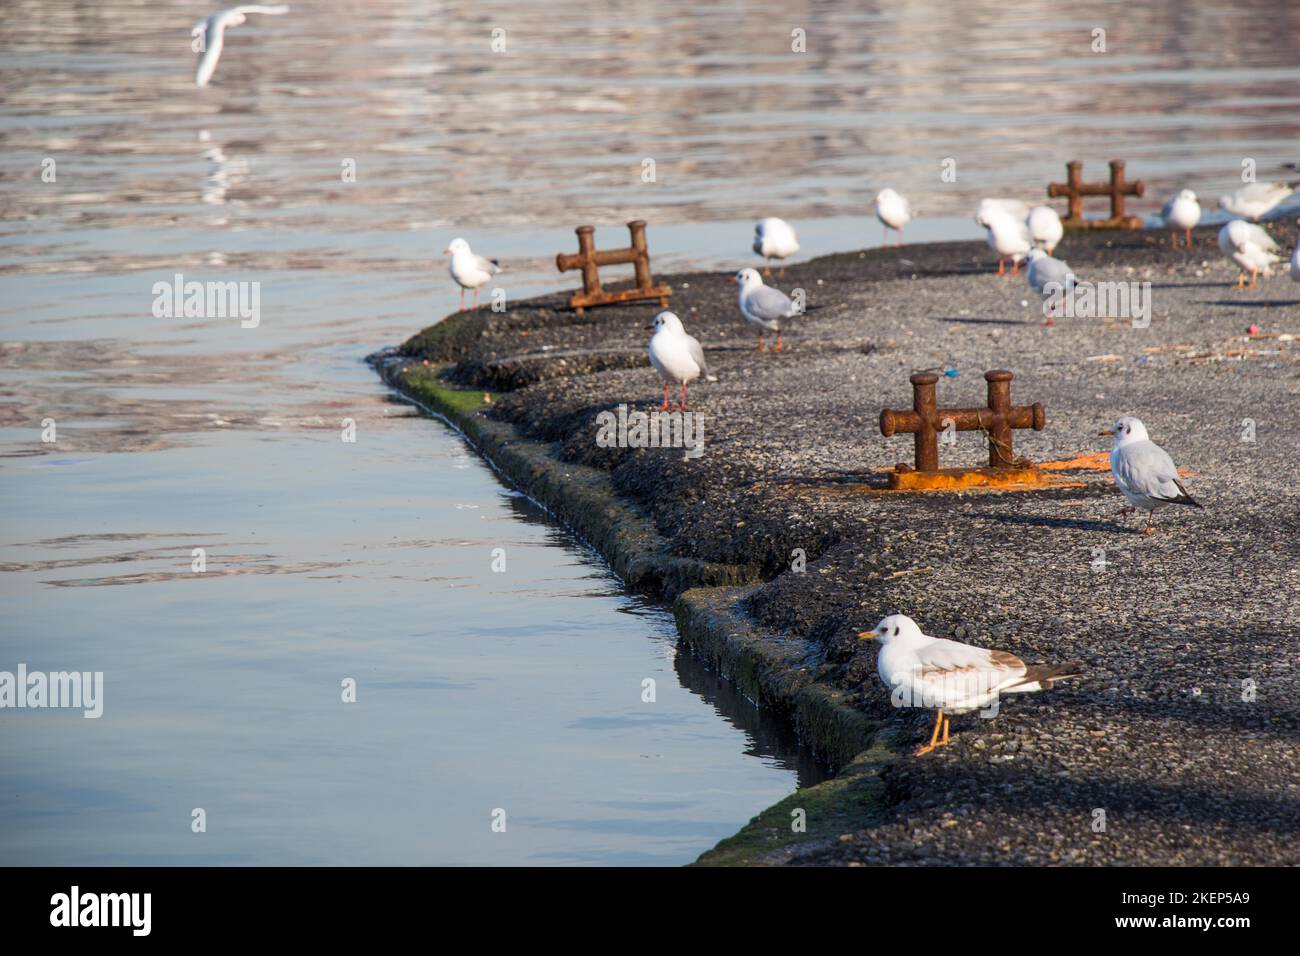 Seagulls live in the coastline in an urban environment Stock Photo